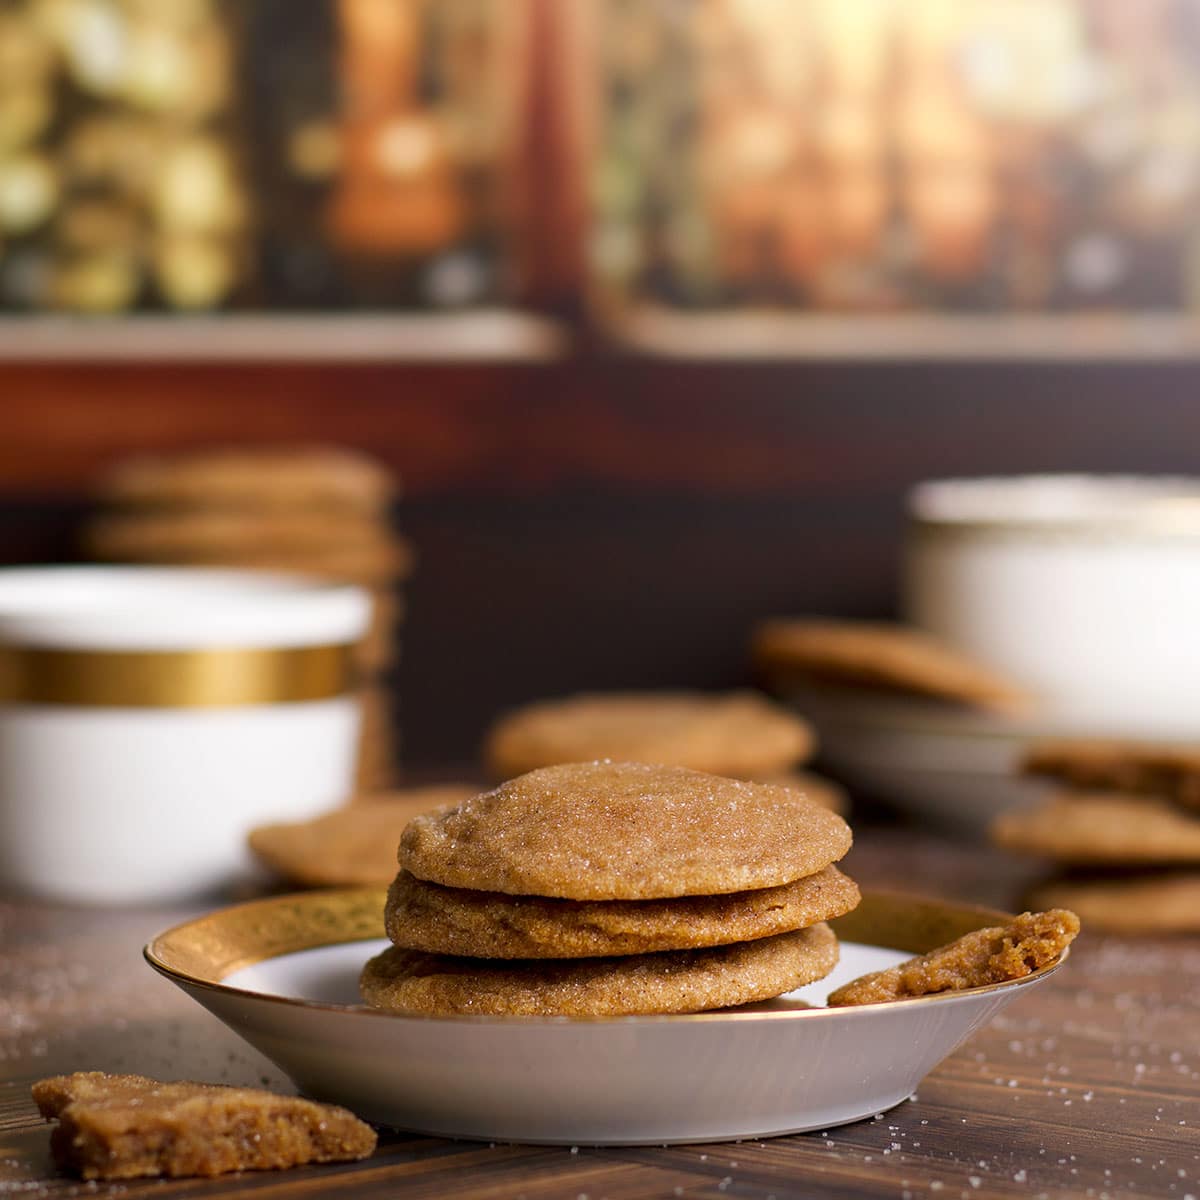 Several brown sugar cookies on a plate with stacks of cookies on the table around the plate.